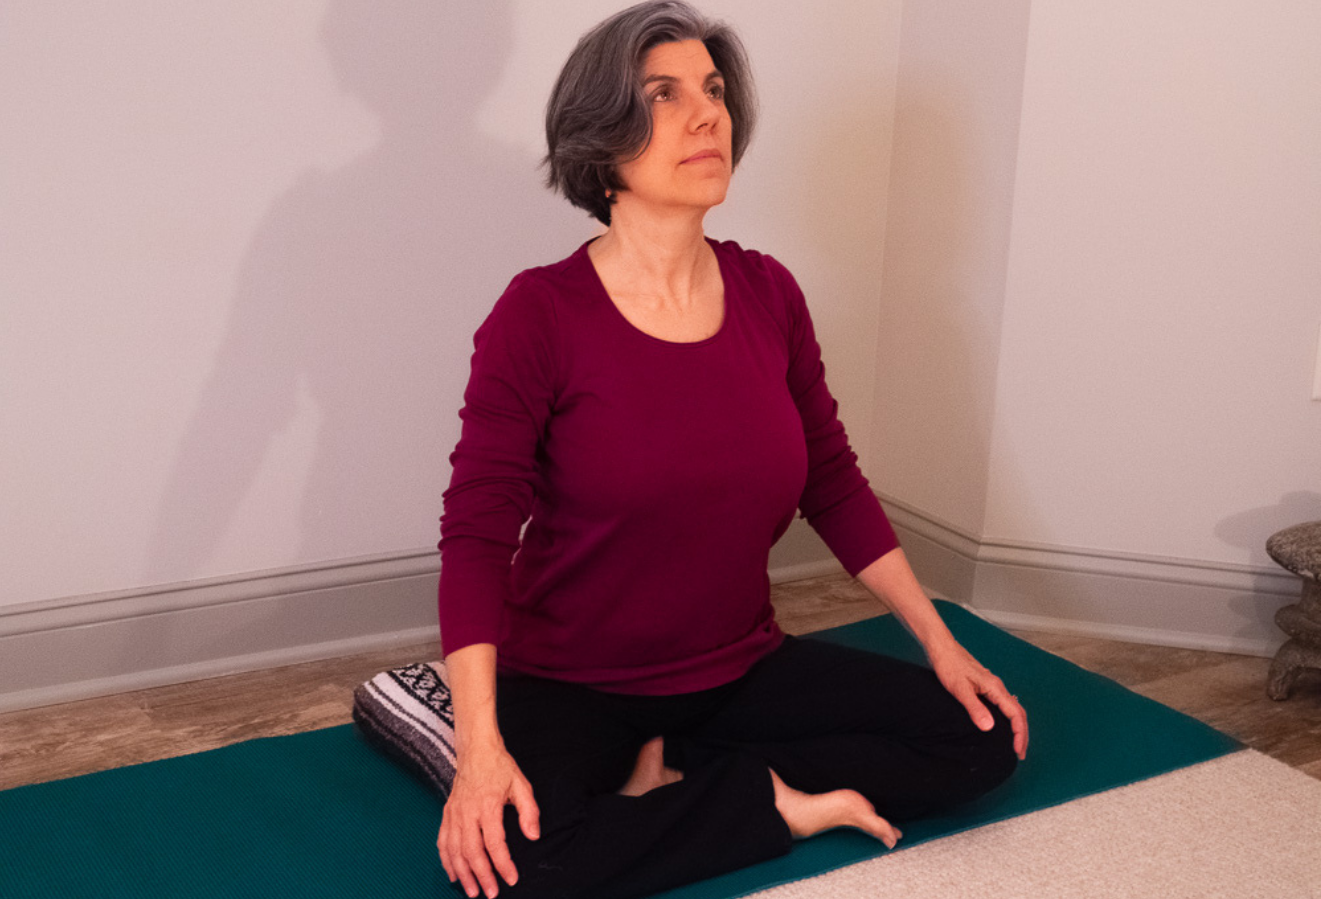 Seated Cobra Pose or Seated Bhujangasana. Known for opening the heart and chest area and strengthening the back